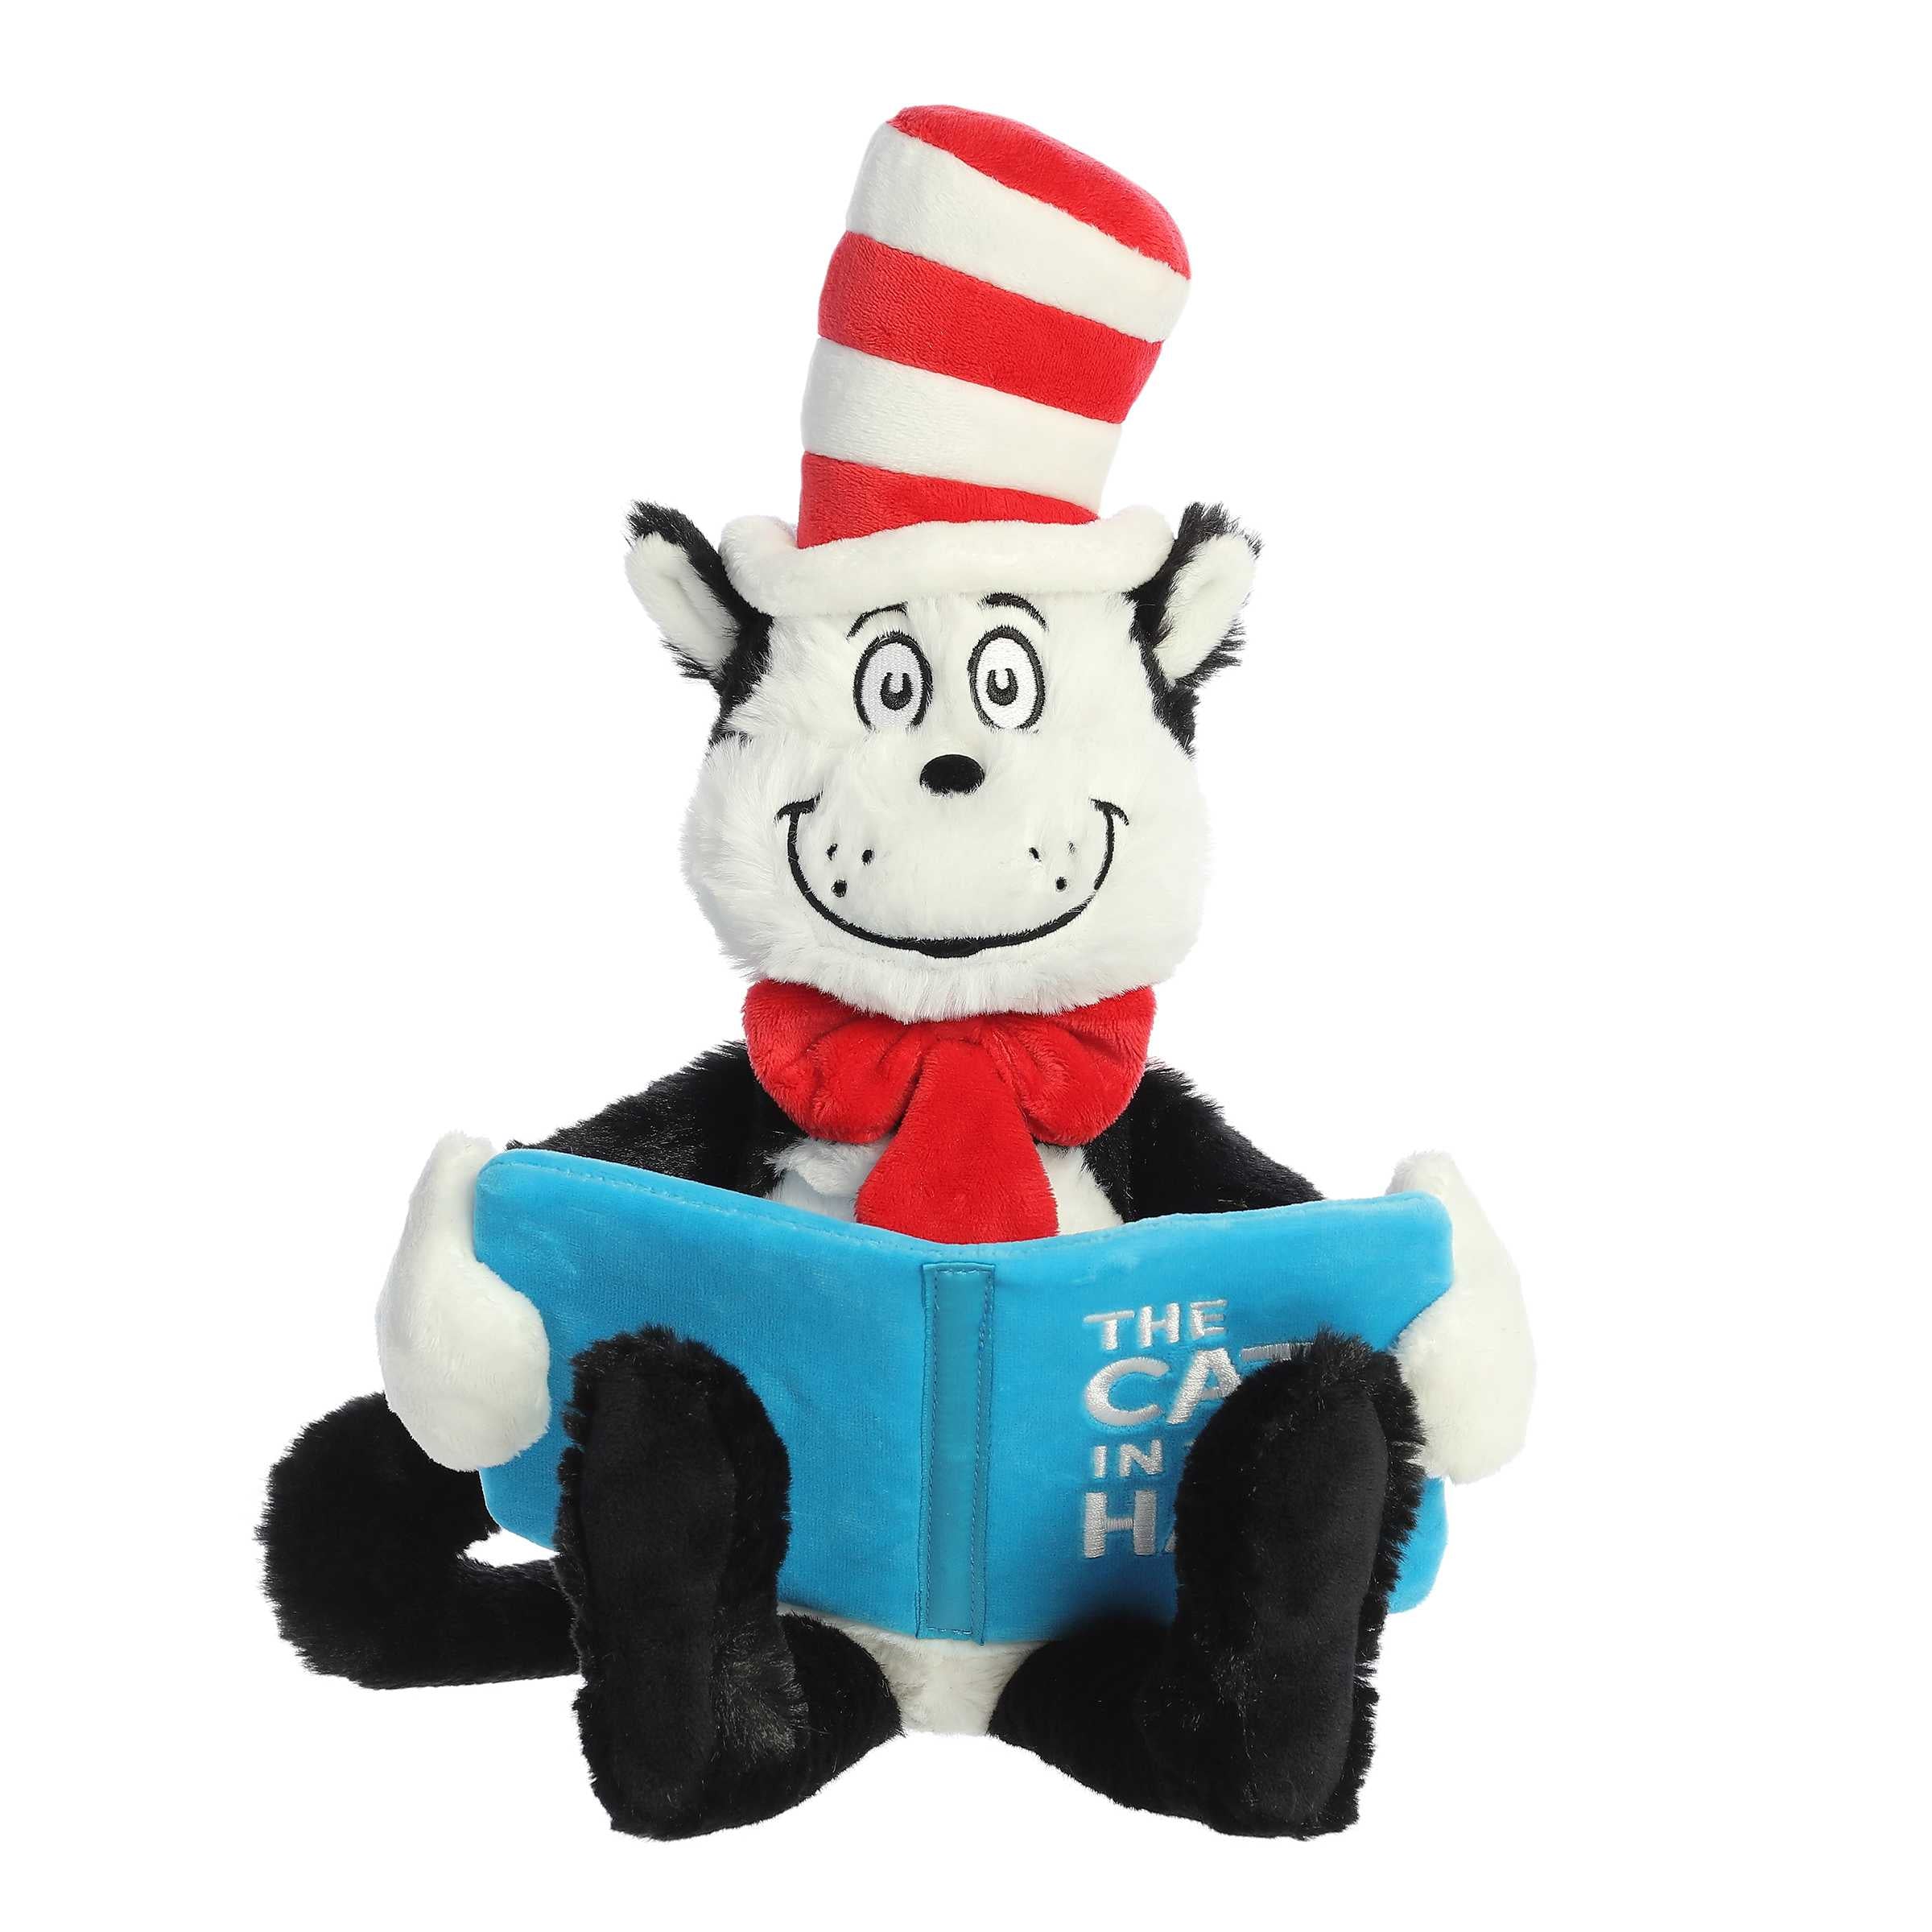 Soft and cuddly Cat in the Hat Plush Toy with signature striped hat, sitting down holding a blue book.